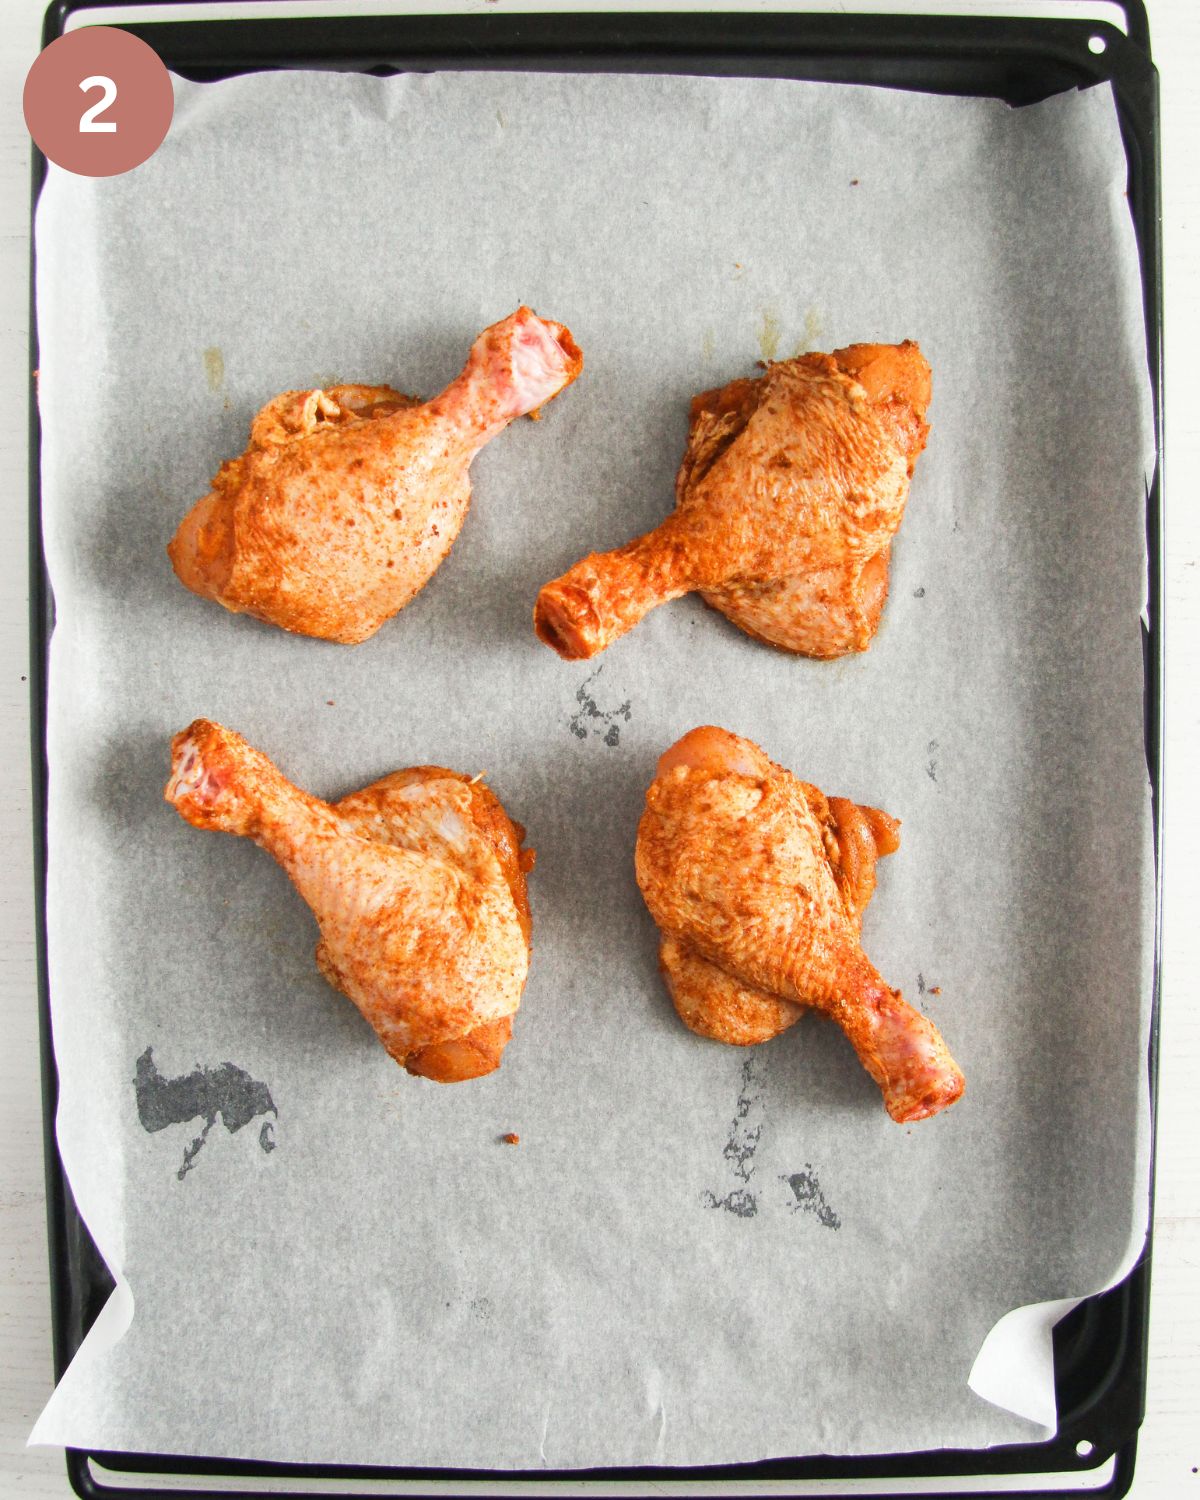 for seasoned, raw butterflied chicken legs on a baking sheet lined with white paper.